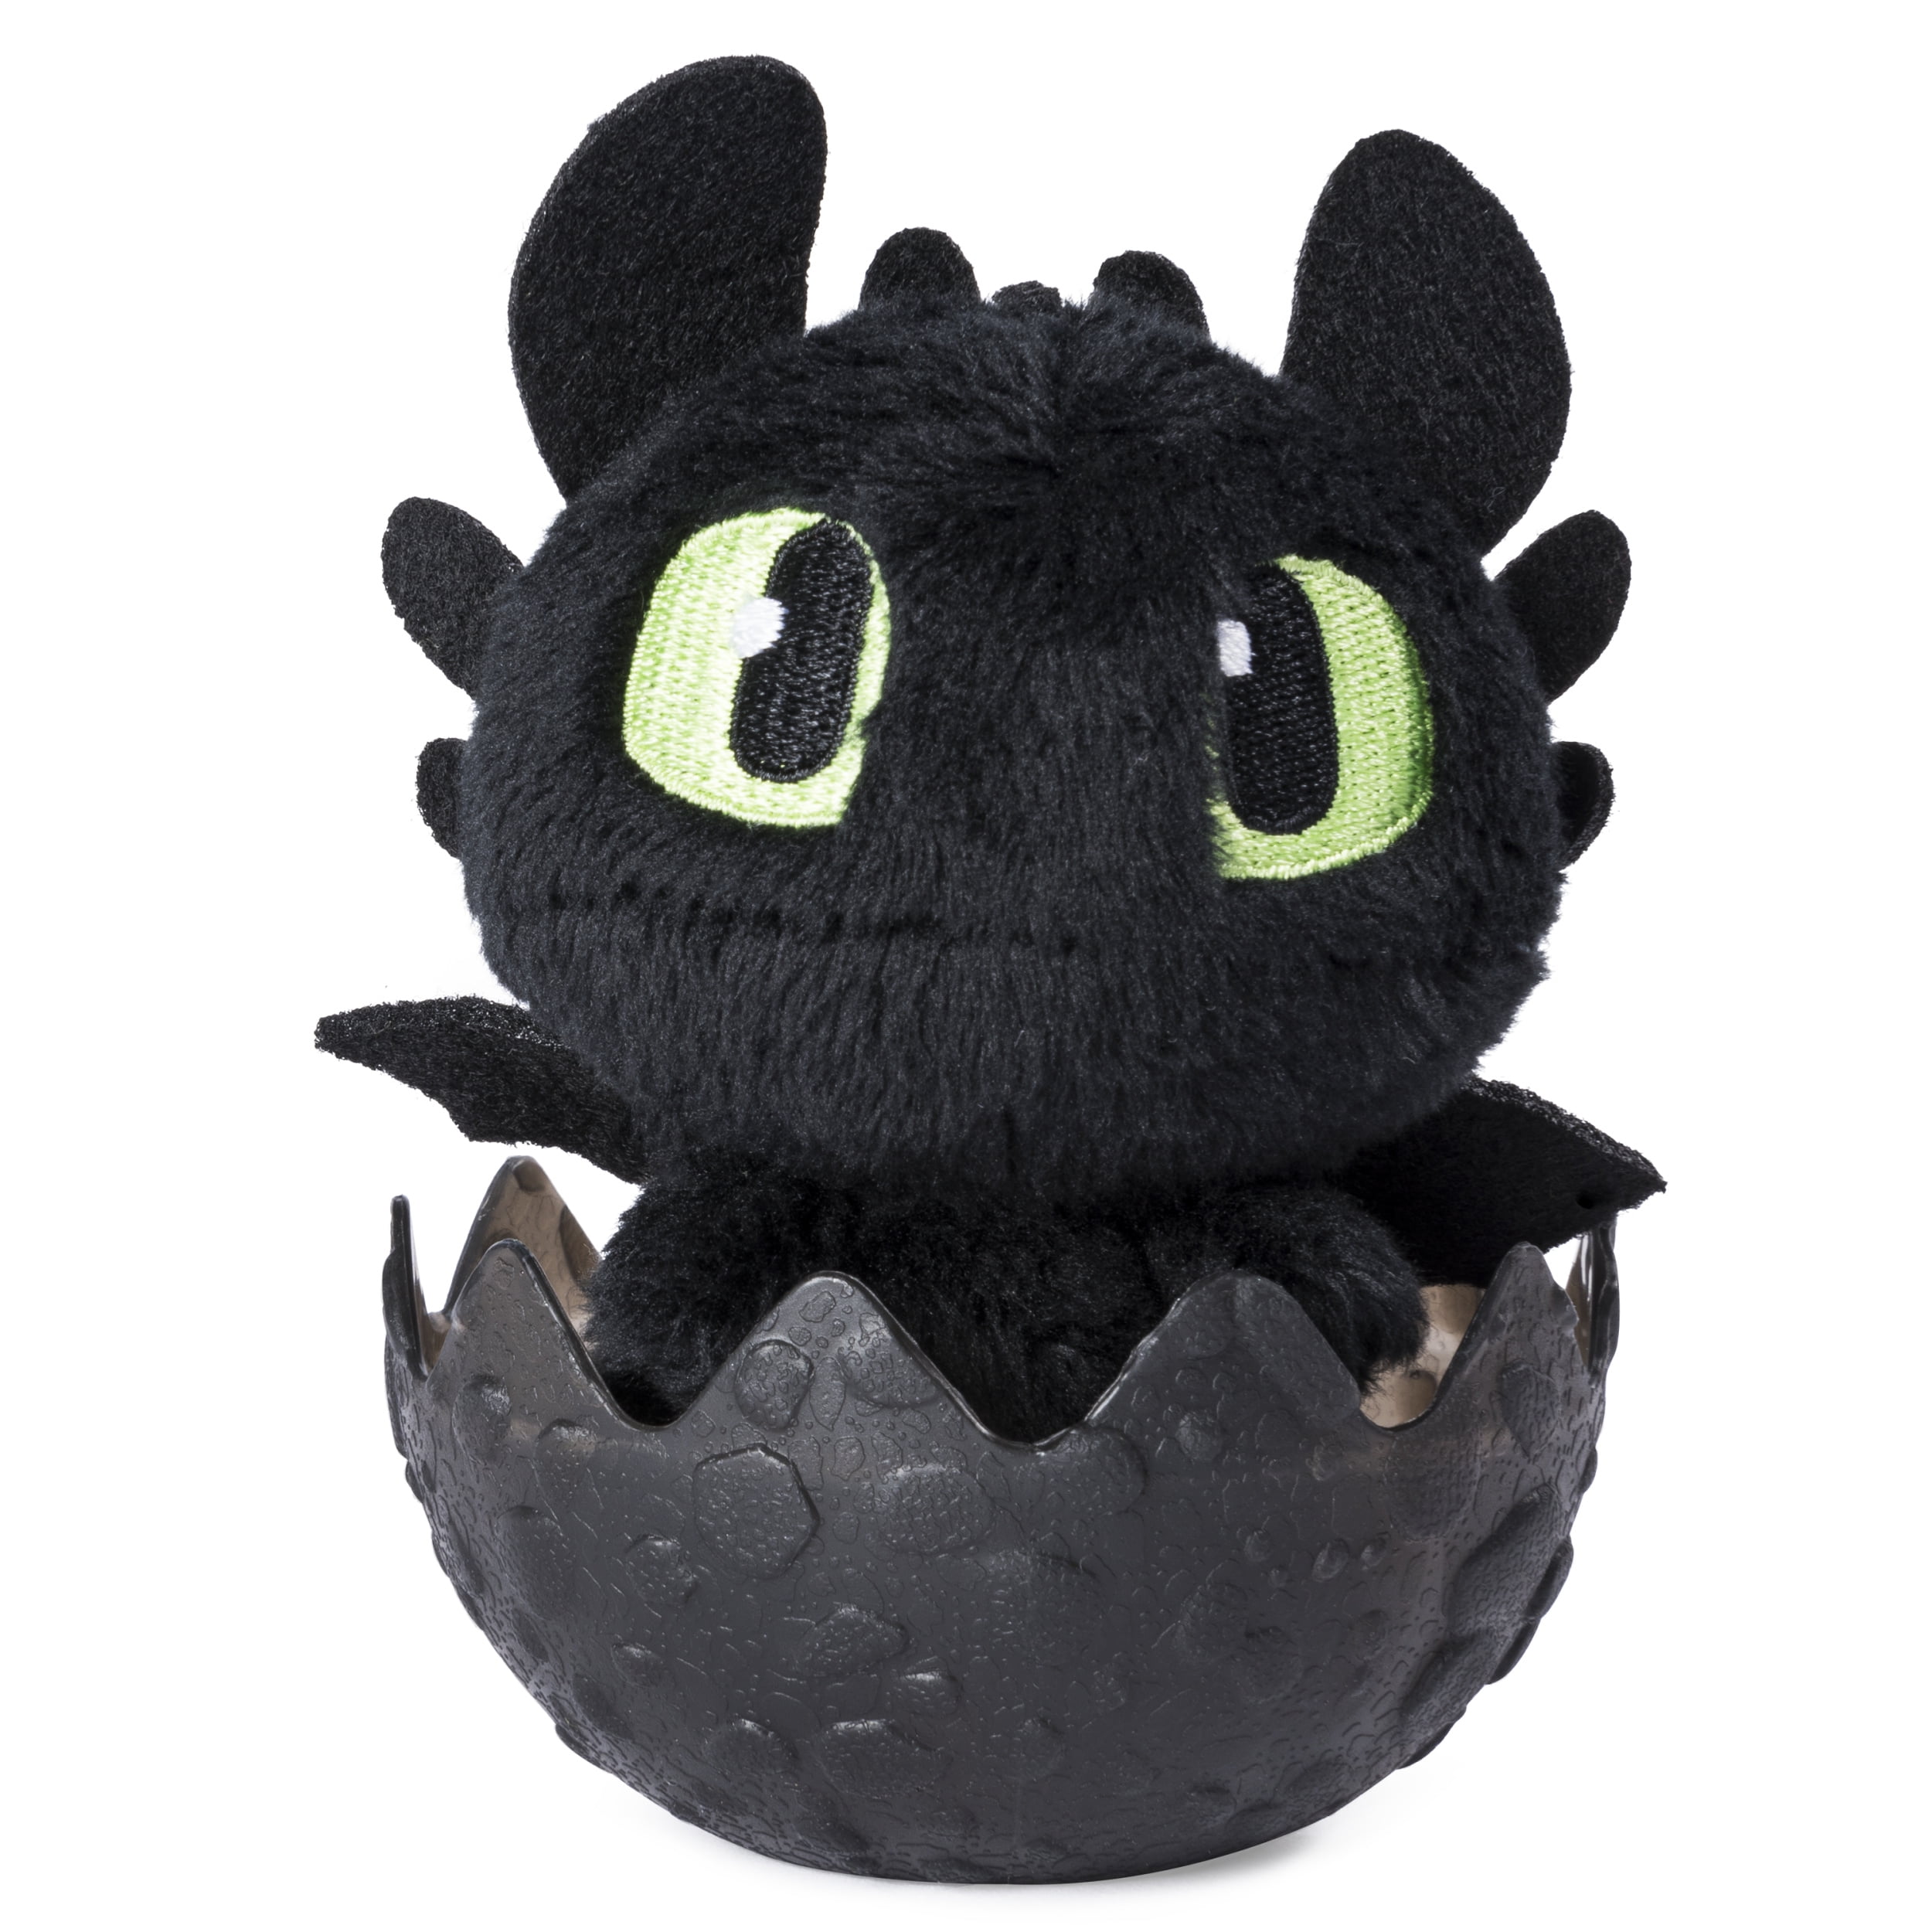 DreamWorks Dragons, Baby Toothless 3-inch Plush, Cute Collectible Plush